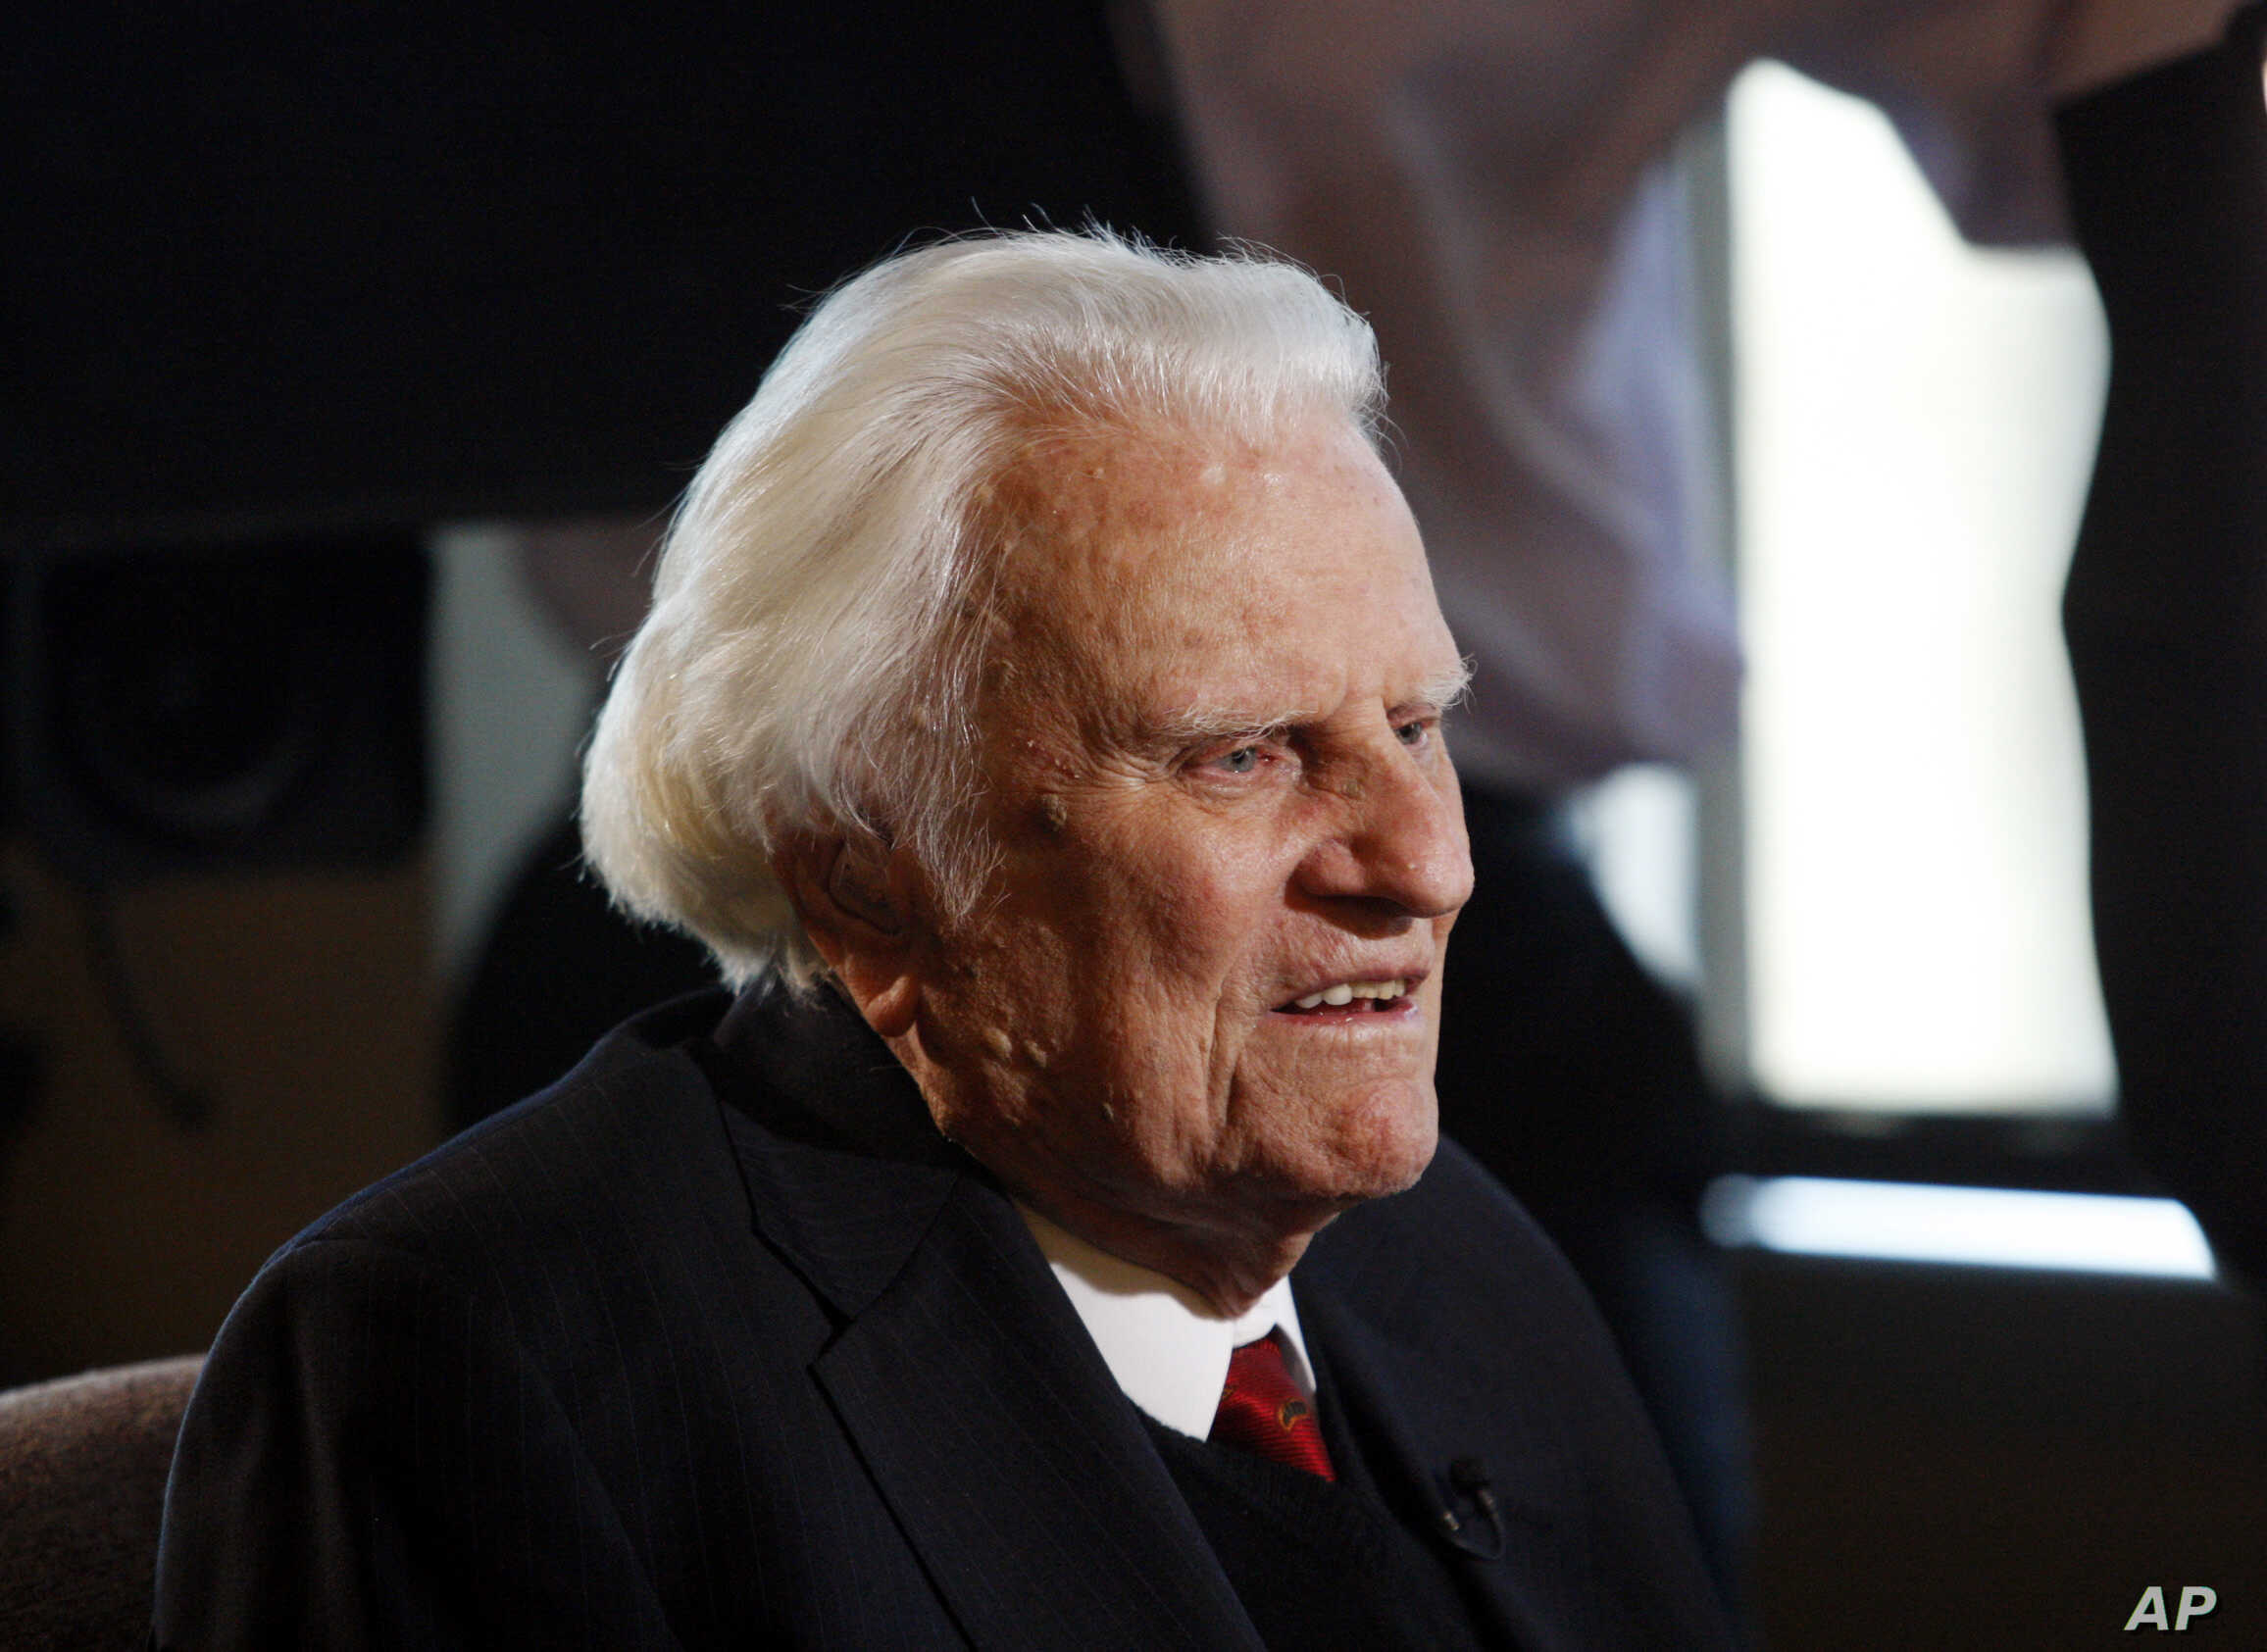 FILE - In this Dec. 20, 2010 file photo, evangelist Billy Graham, 92, speaks during an interview at the Billy Graham Evangelistic Association headquarters in Charlotte, N.C. As he approaches his 93rd birthday, Americas most famous Christian evangelist is reflecting frankly on his mortality and offering perspective for the countrys aging population. (AP Photo/Nell Redmond, File)